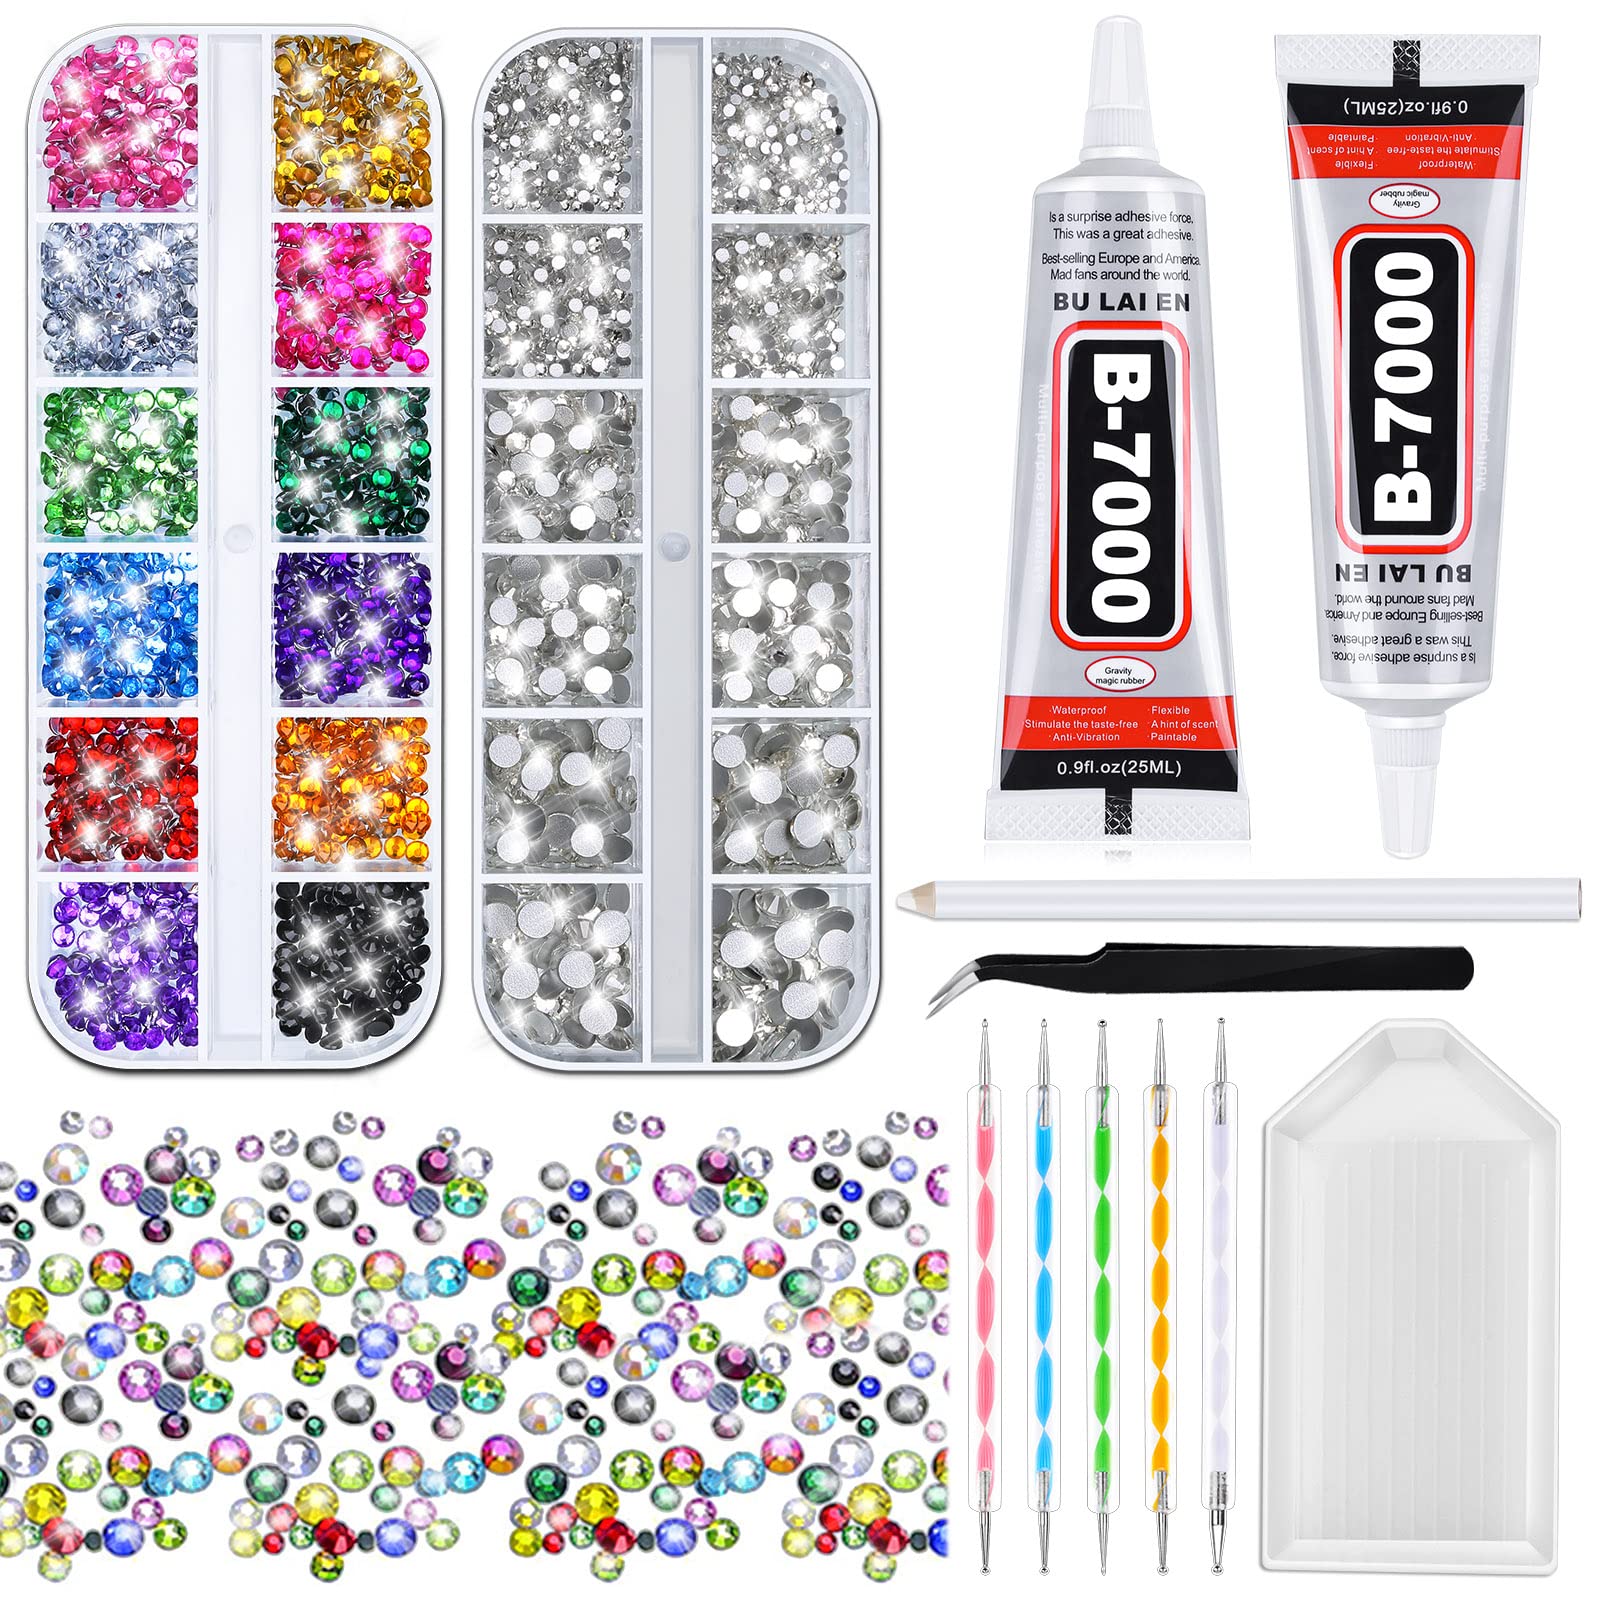 Mckanti B7000 Rhinestone Clear Glue and 2800Pcs Rhinestones for Crafts 13  Colors 5 Sizes Rhinestones Set with 50ml Glue 5 Dotting Pens Tweezers Wax  Pencil Tray Rhinestone Kit for Nails Shoes Bags.